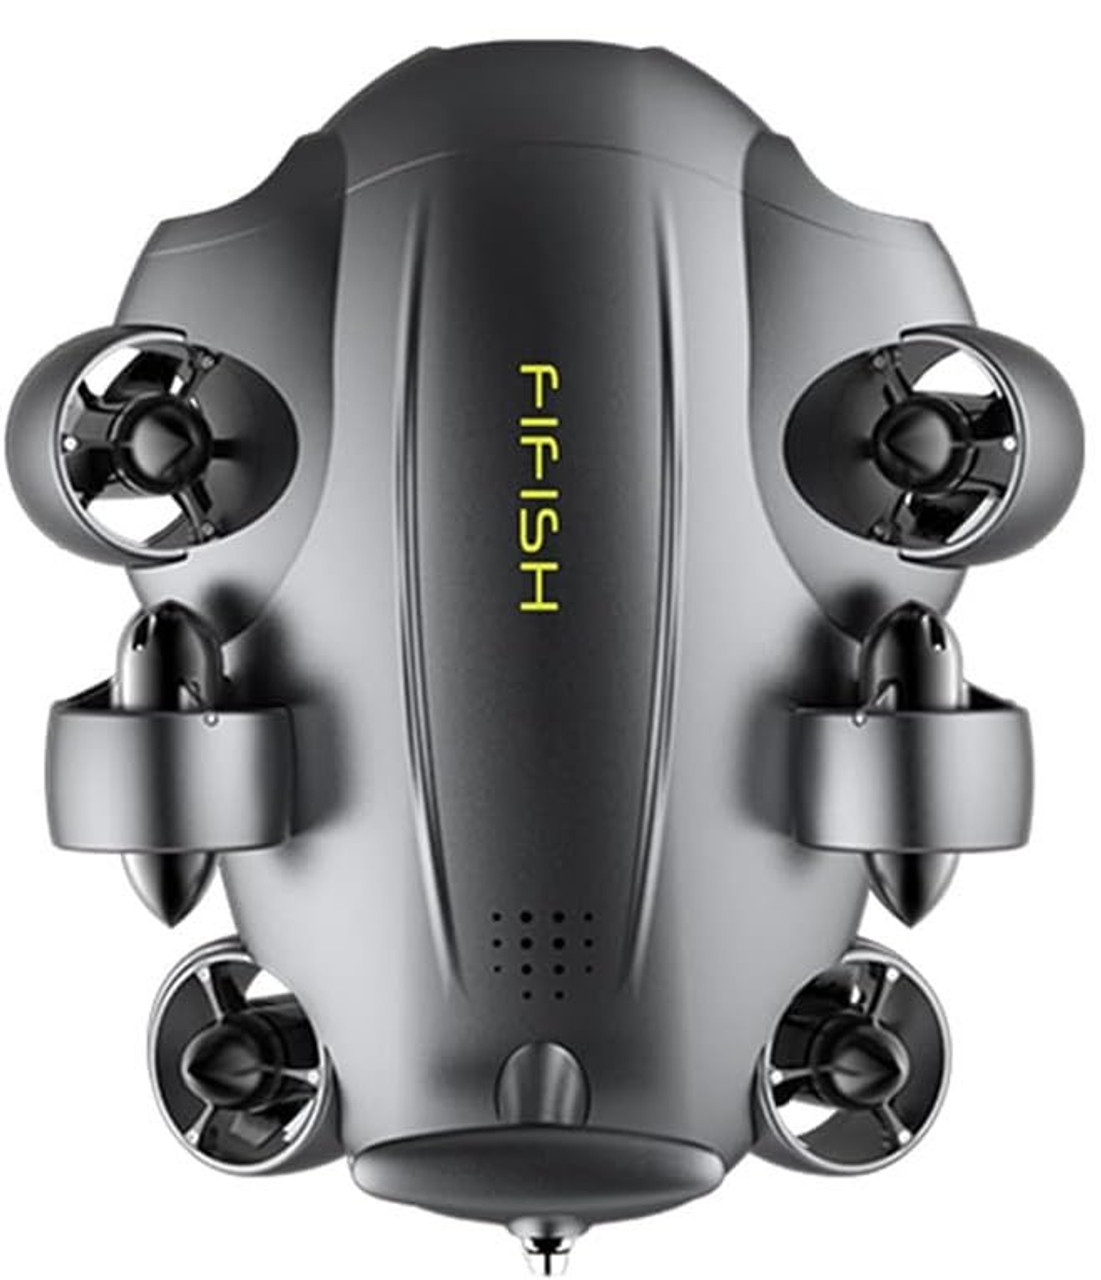 QYSEA FIFISH V6 Expert M100 - Drone-Works